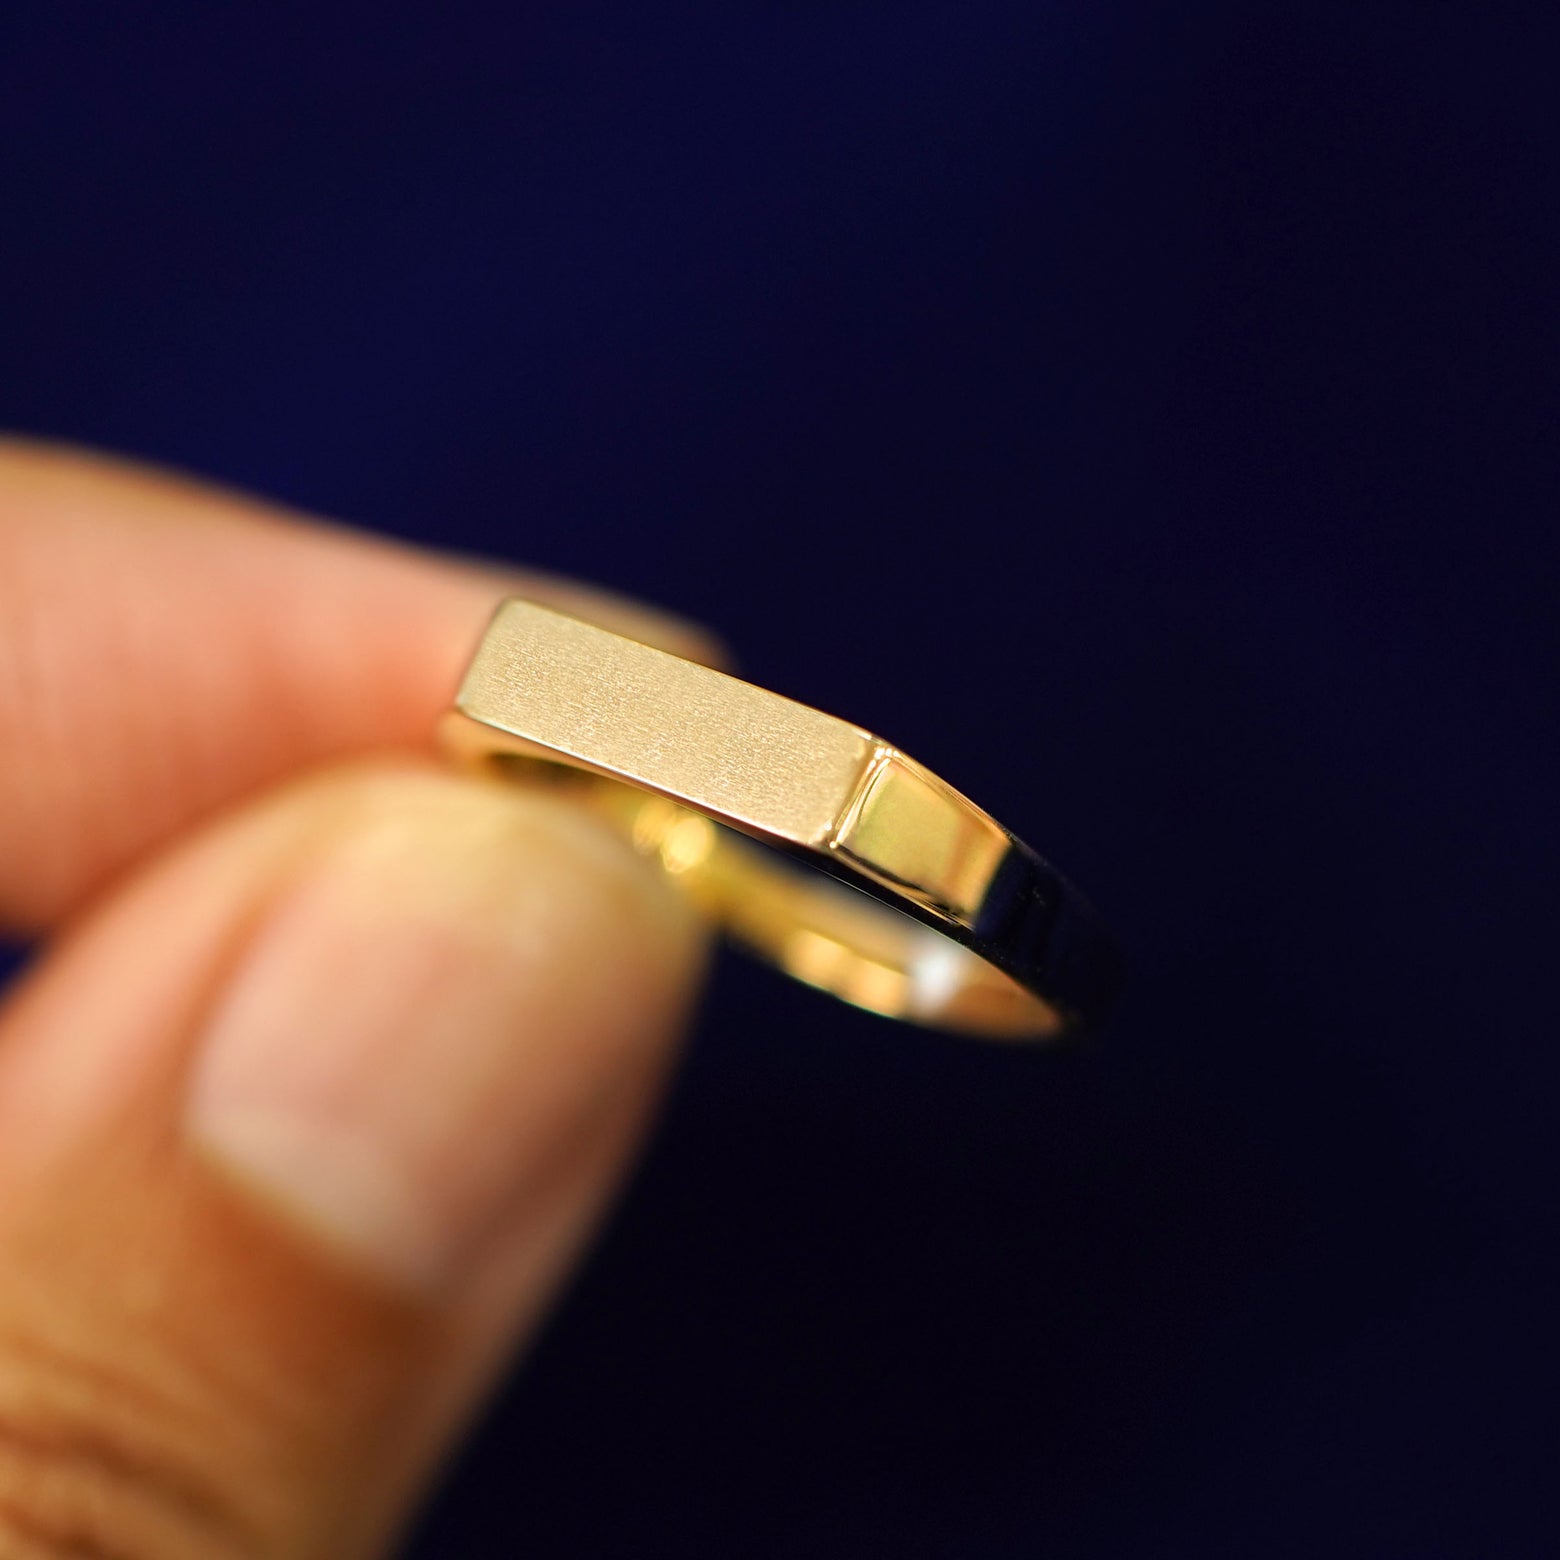 A model holding a Rectangular Signet Ring tilted to show the detail of the top of the ring